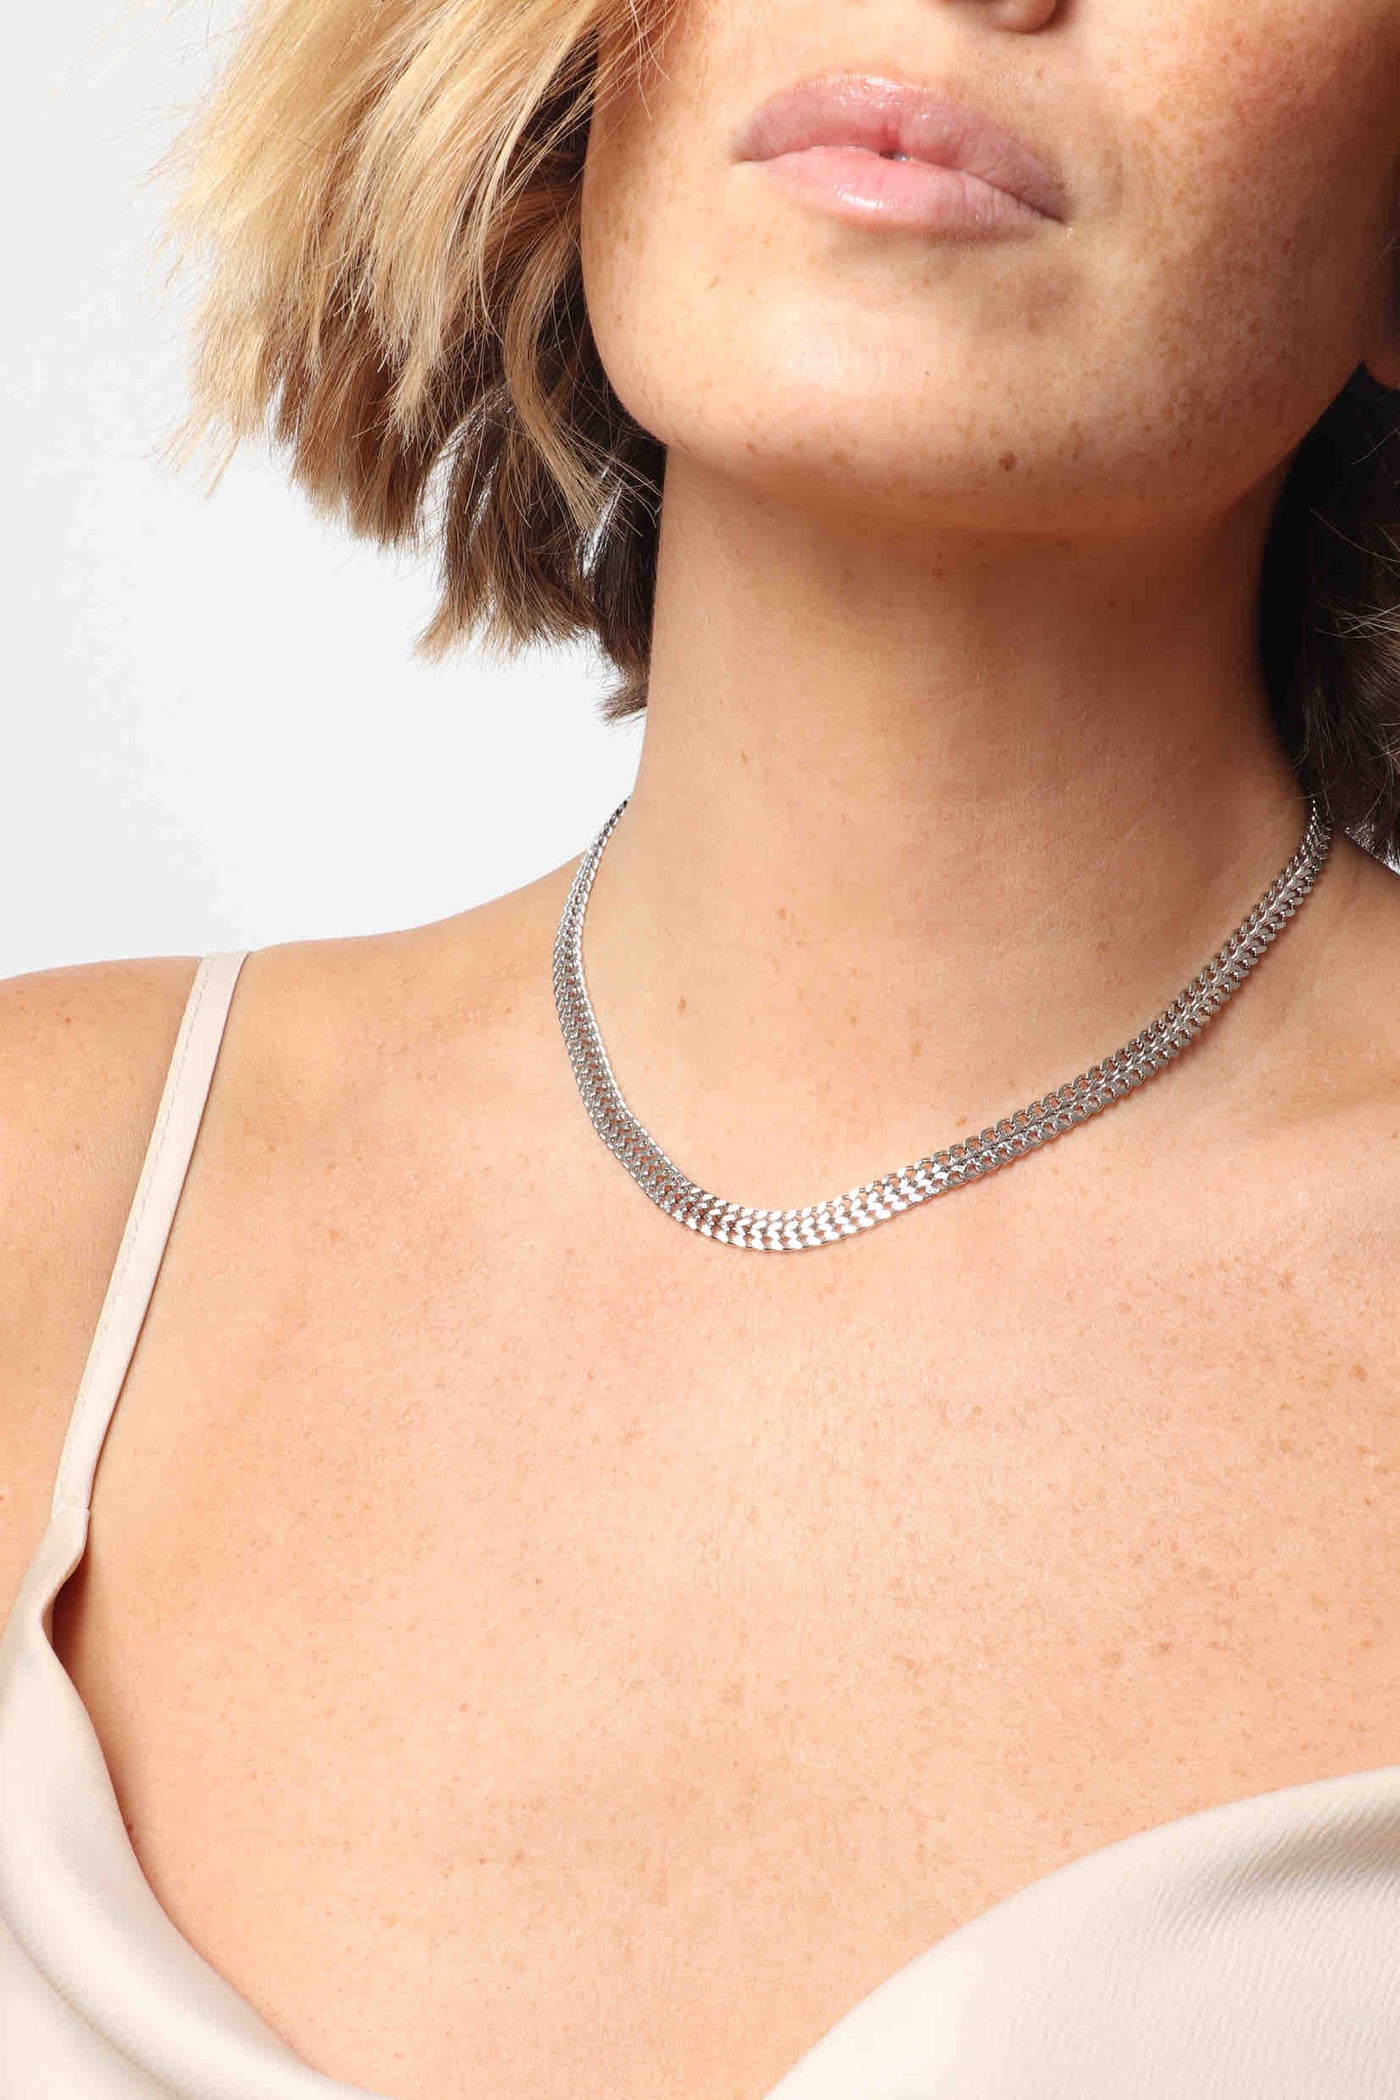 Marrin Costello wearing Marrin Costello Jewelry Lattice Choker woven chain edgy necklace with lobster clasp closure and extender. Waterproof, sustainable, hypoallergenic. Polished stainless steel.